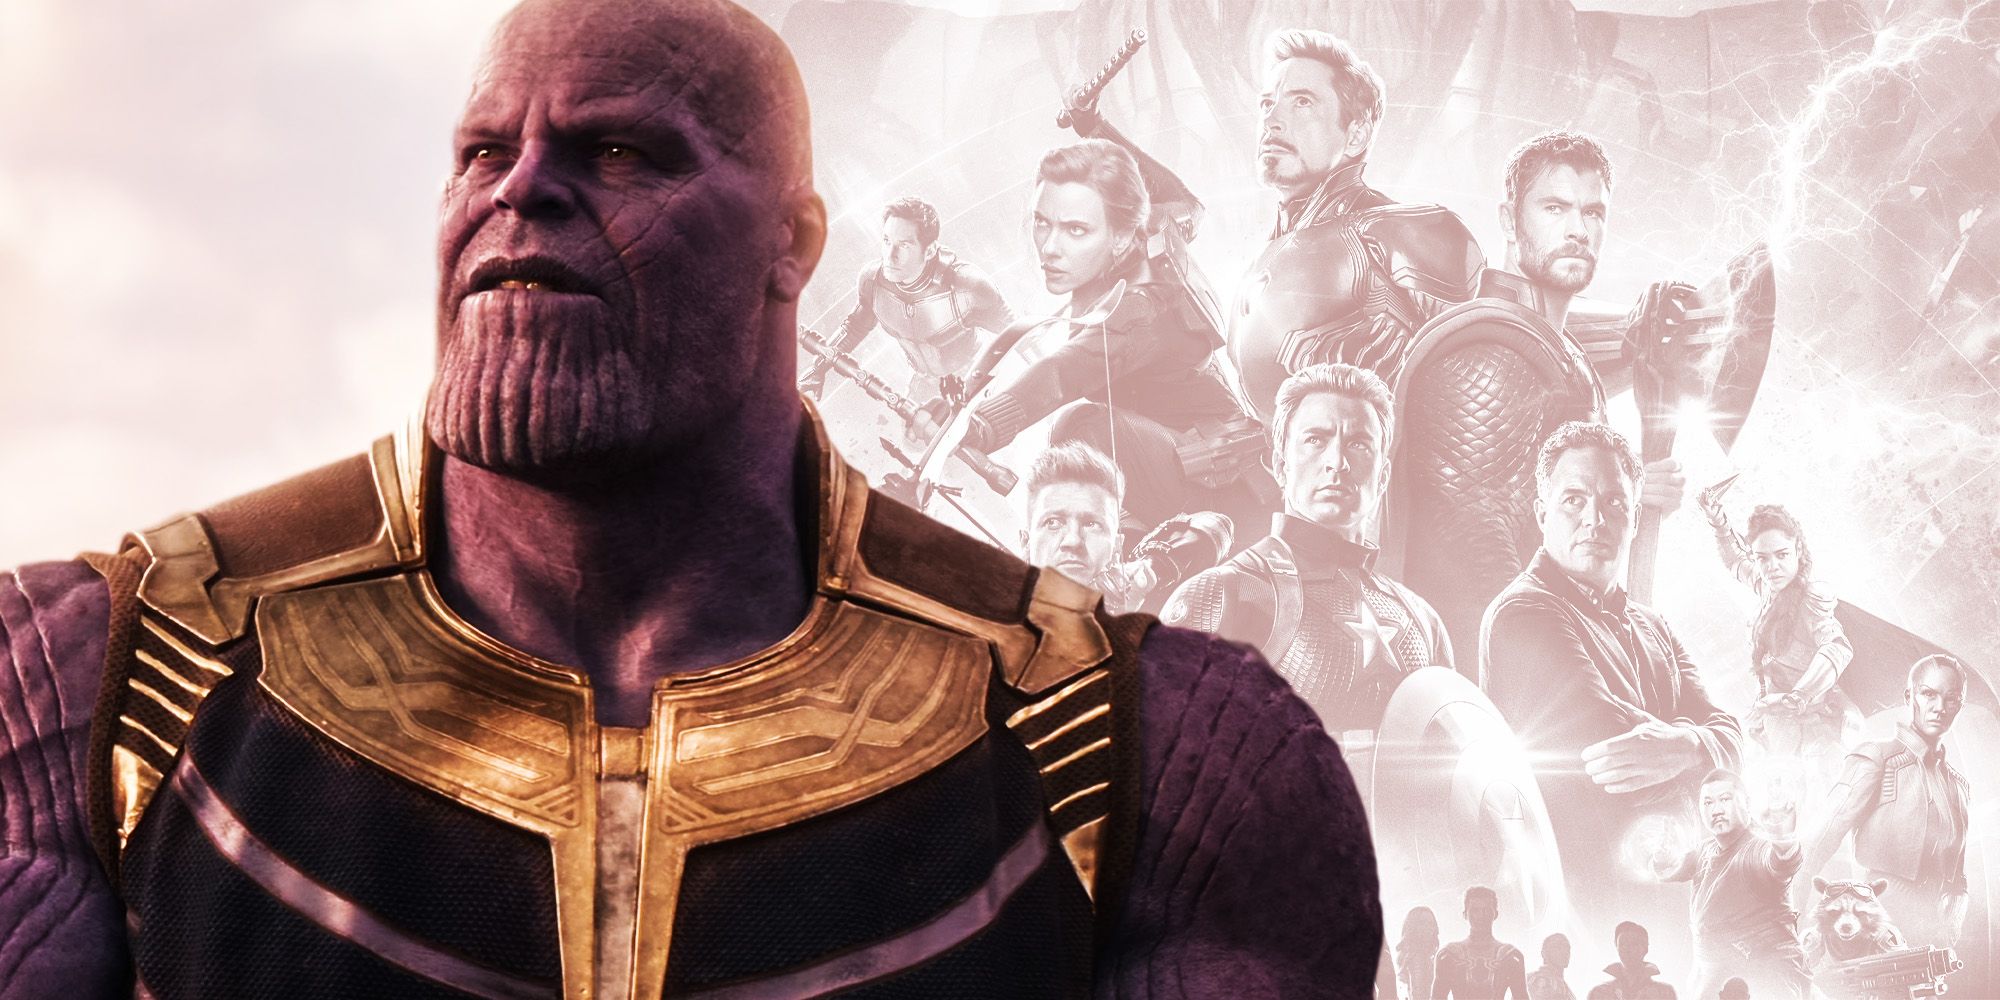 What If Thanos Had Snapped The Other Half Of The Avengers In Infinity War?